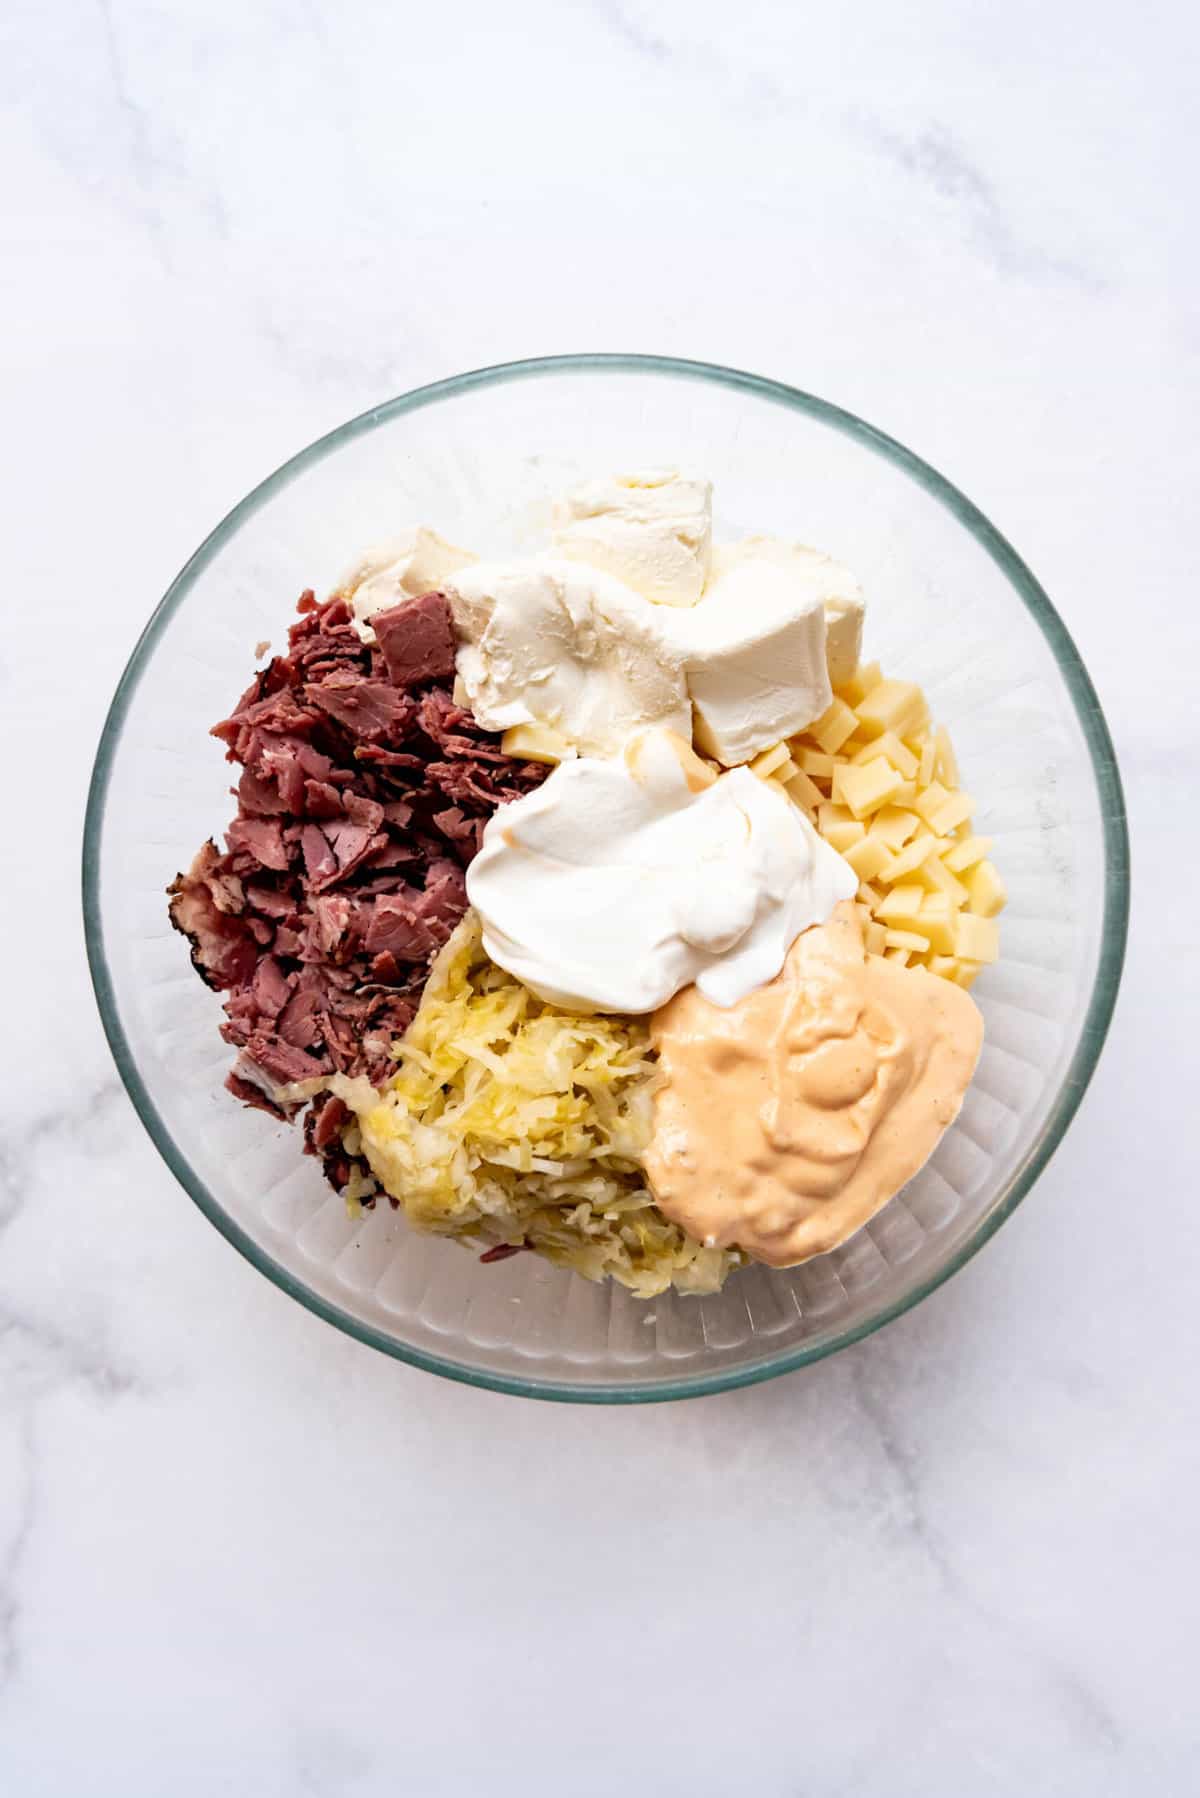 All of the ingredients for making reuben dip in a large mixing bowl.